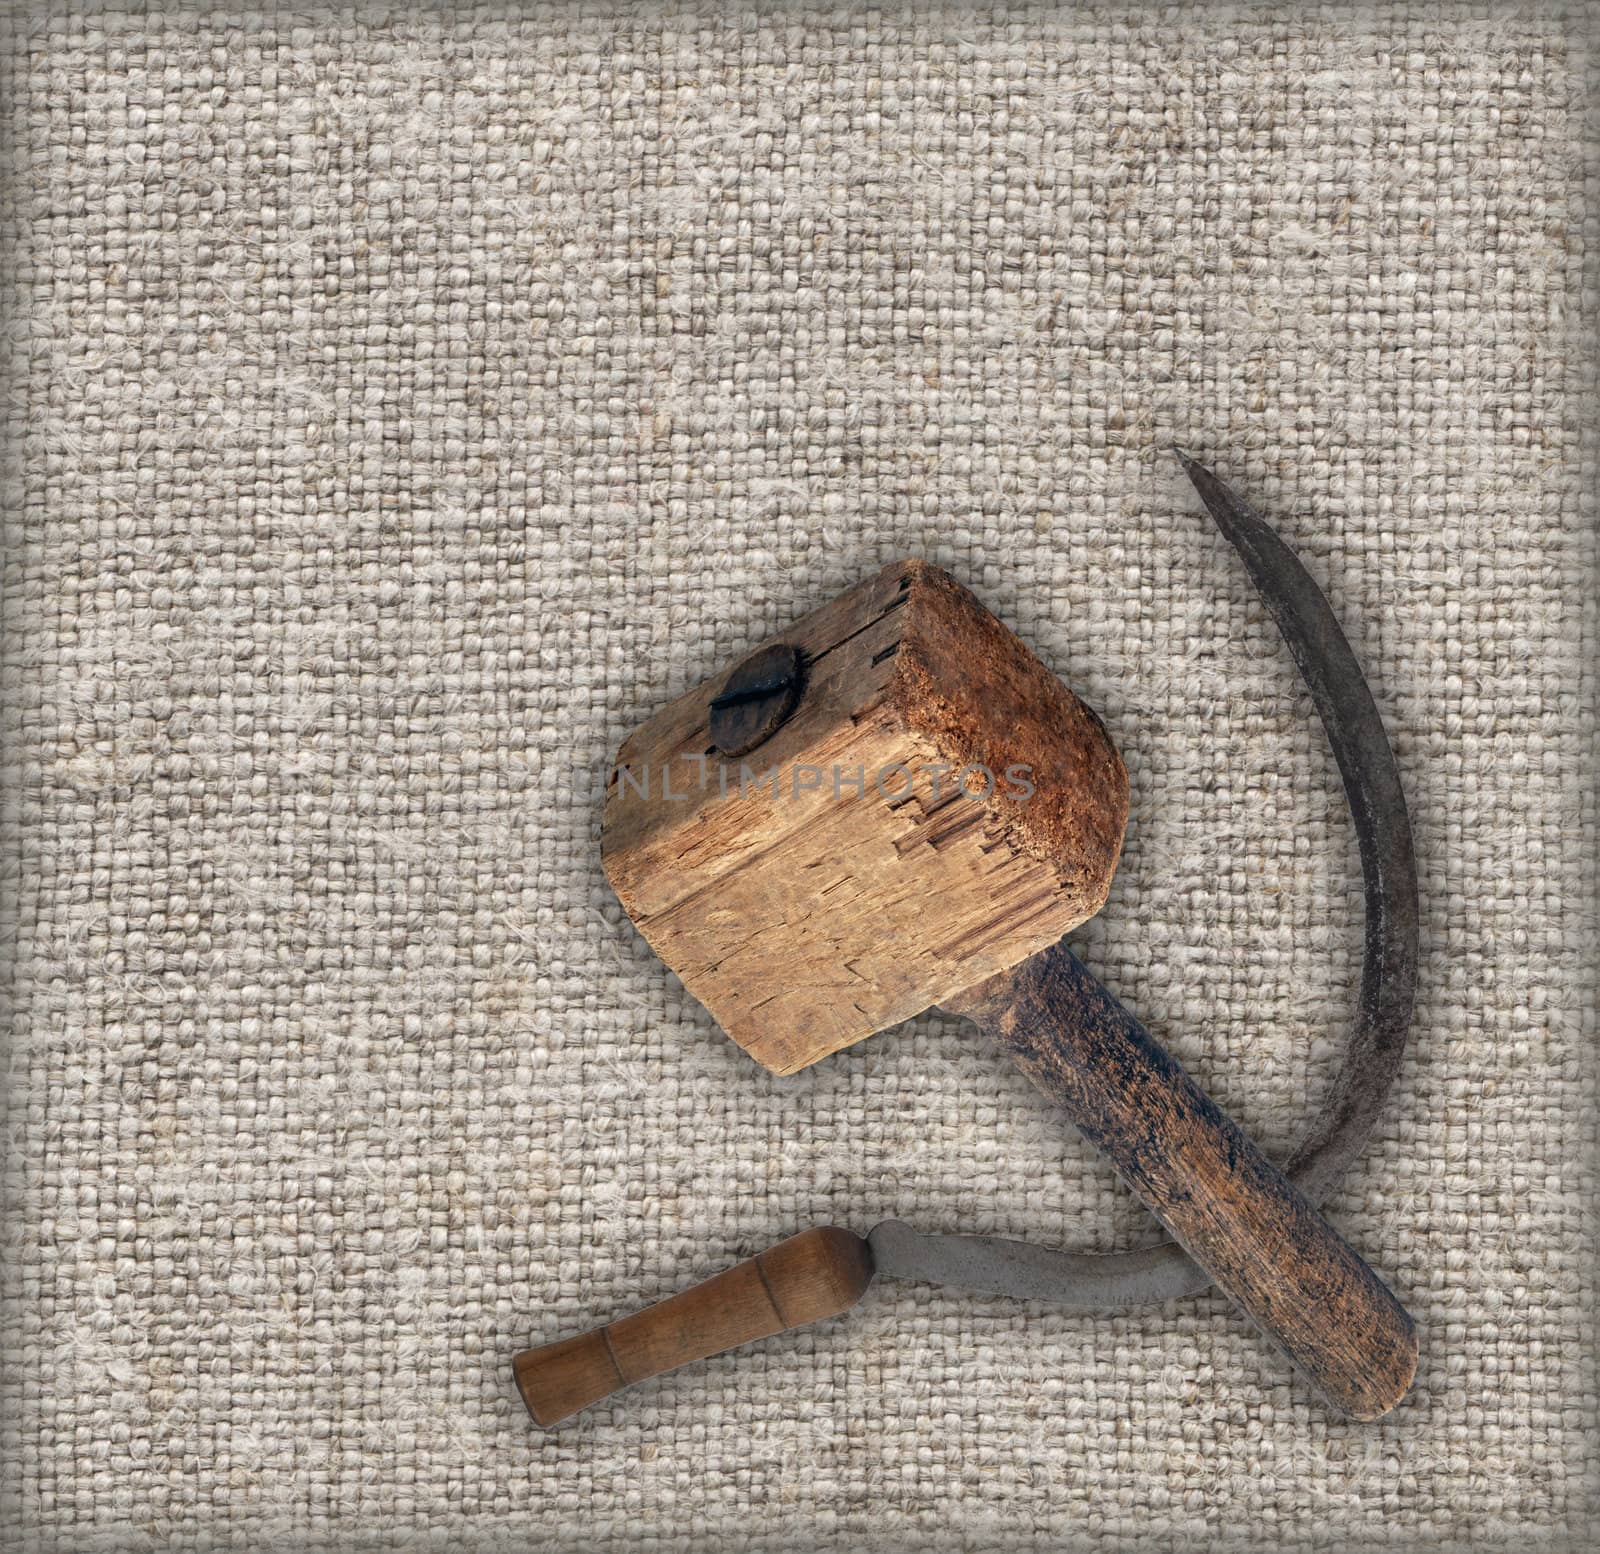 Old tools on canvas: sickle and wooden hammer mallet. Made in the USSR, Russia, Siberia, in the mid-20th century